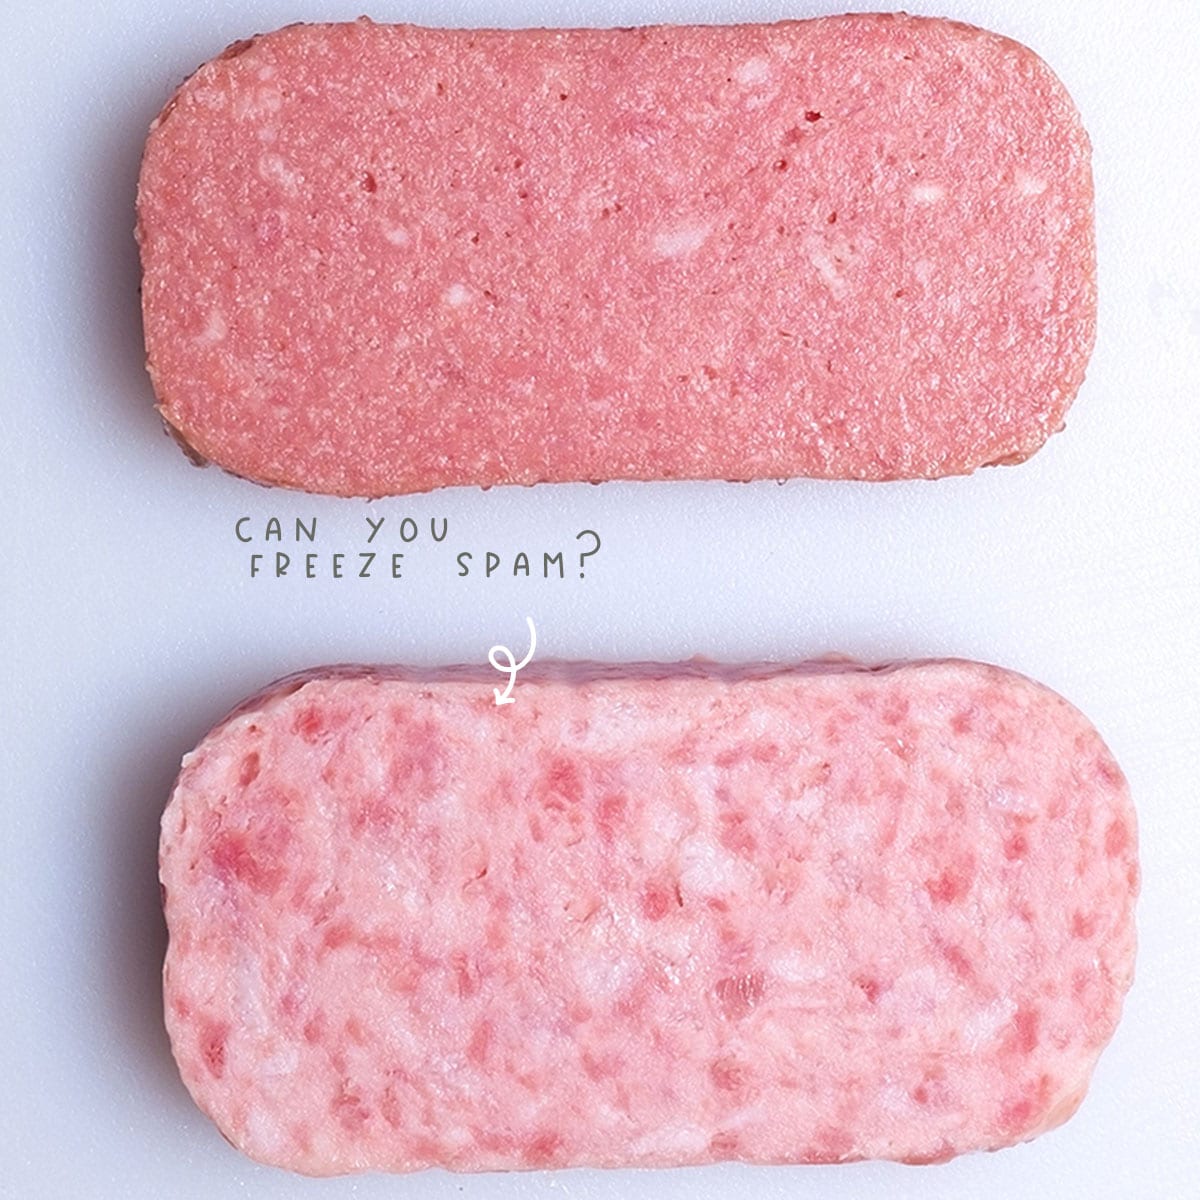 Can You Freeze Spam? 